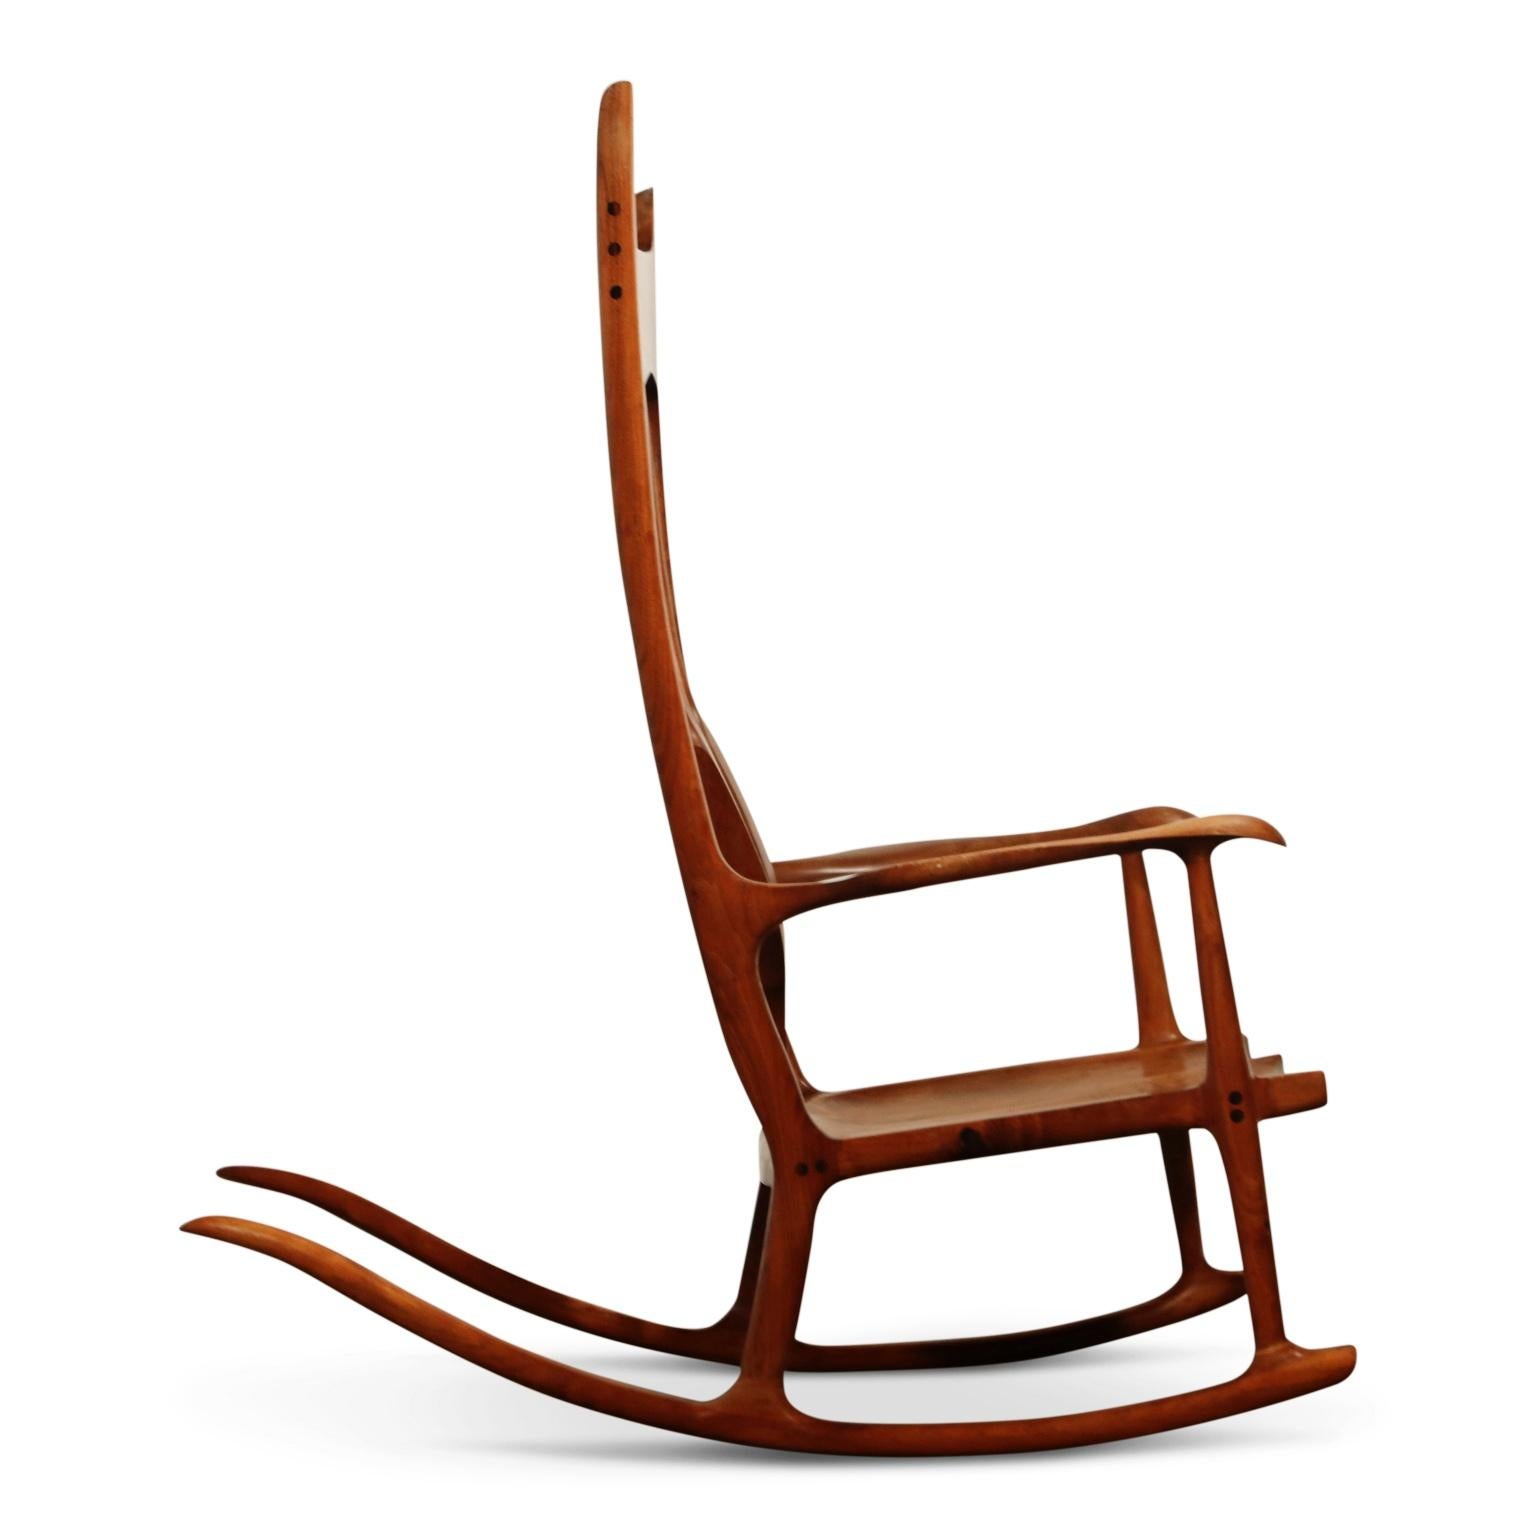 Late 20th Century Oversized Sam Maloof Style Studio Craftsman Rocking Chair, Signed and Dated